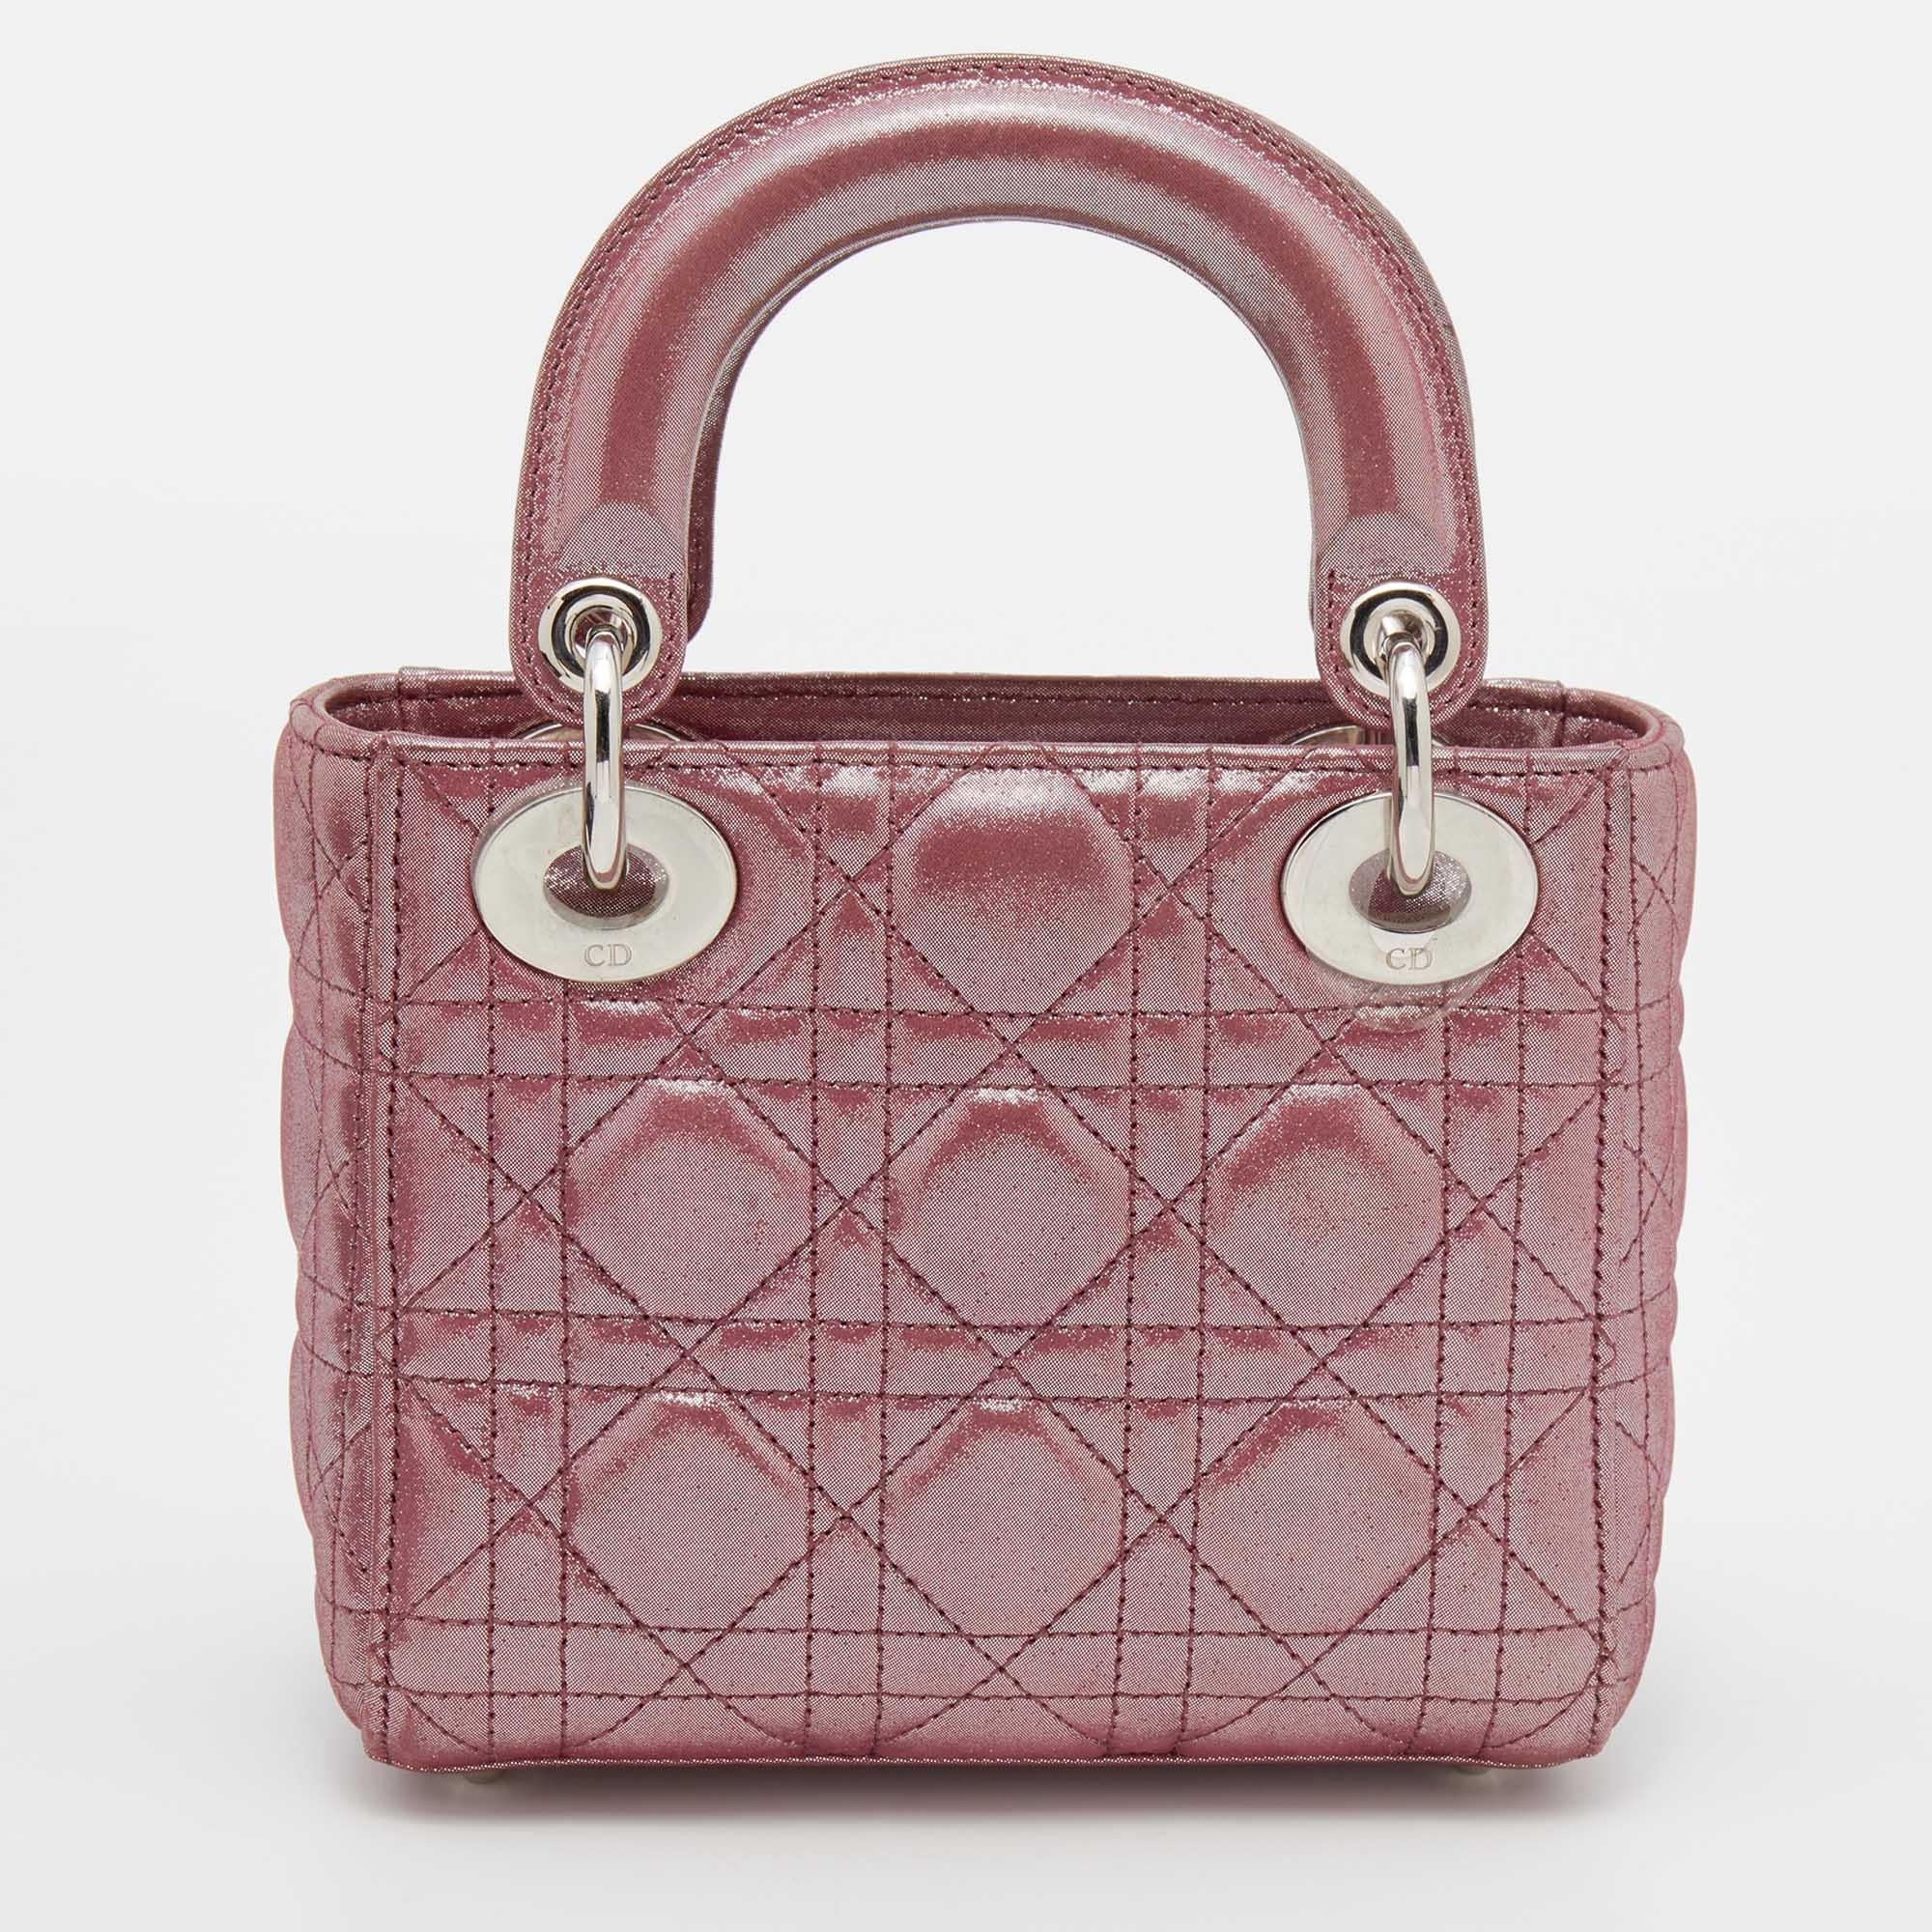 The Lady Dior tote is a Dior creation that has gained recognition worldwide and is today a coveted bag that every fashionista craves to possess. This mini tote has been crafted from leather and it carries the signature Cannage quilt. It is equipped